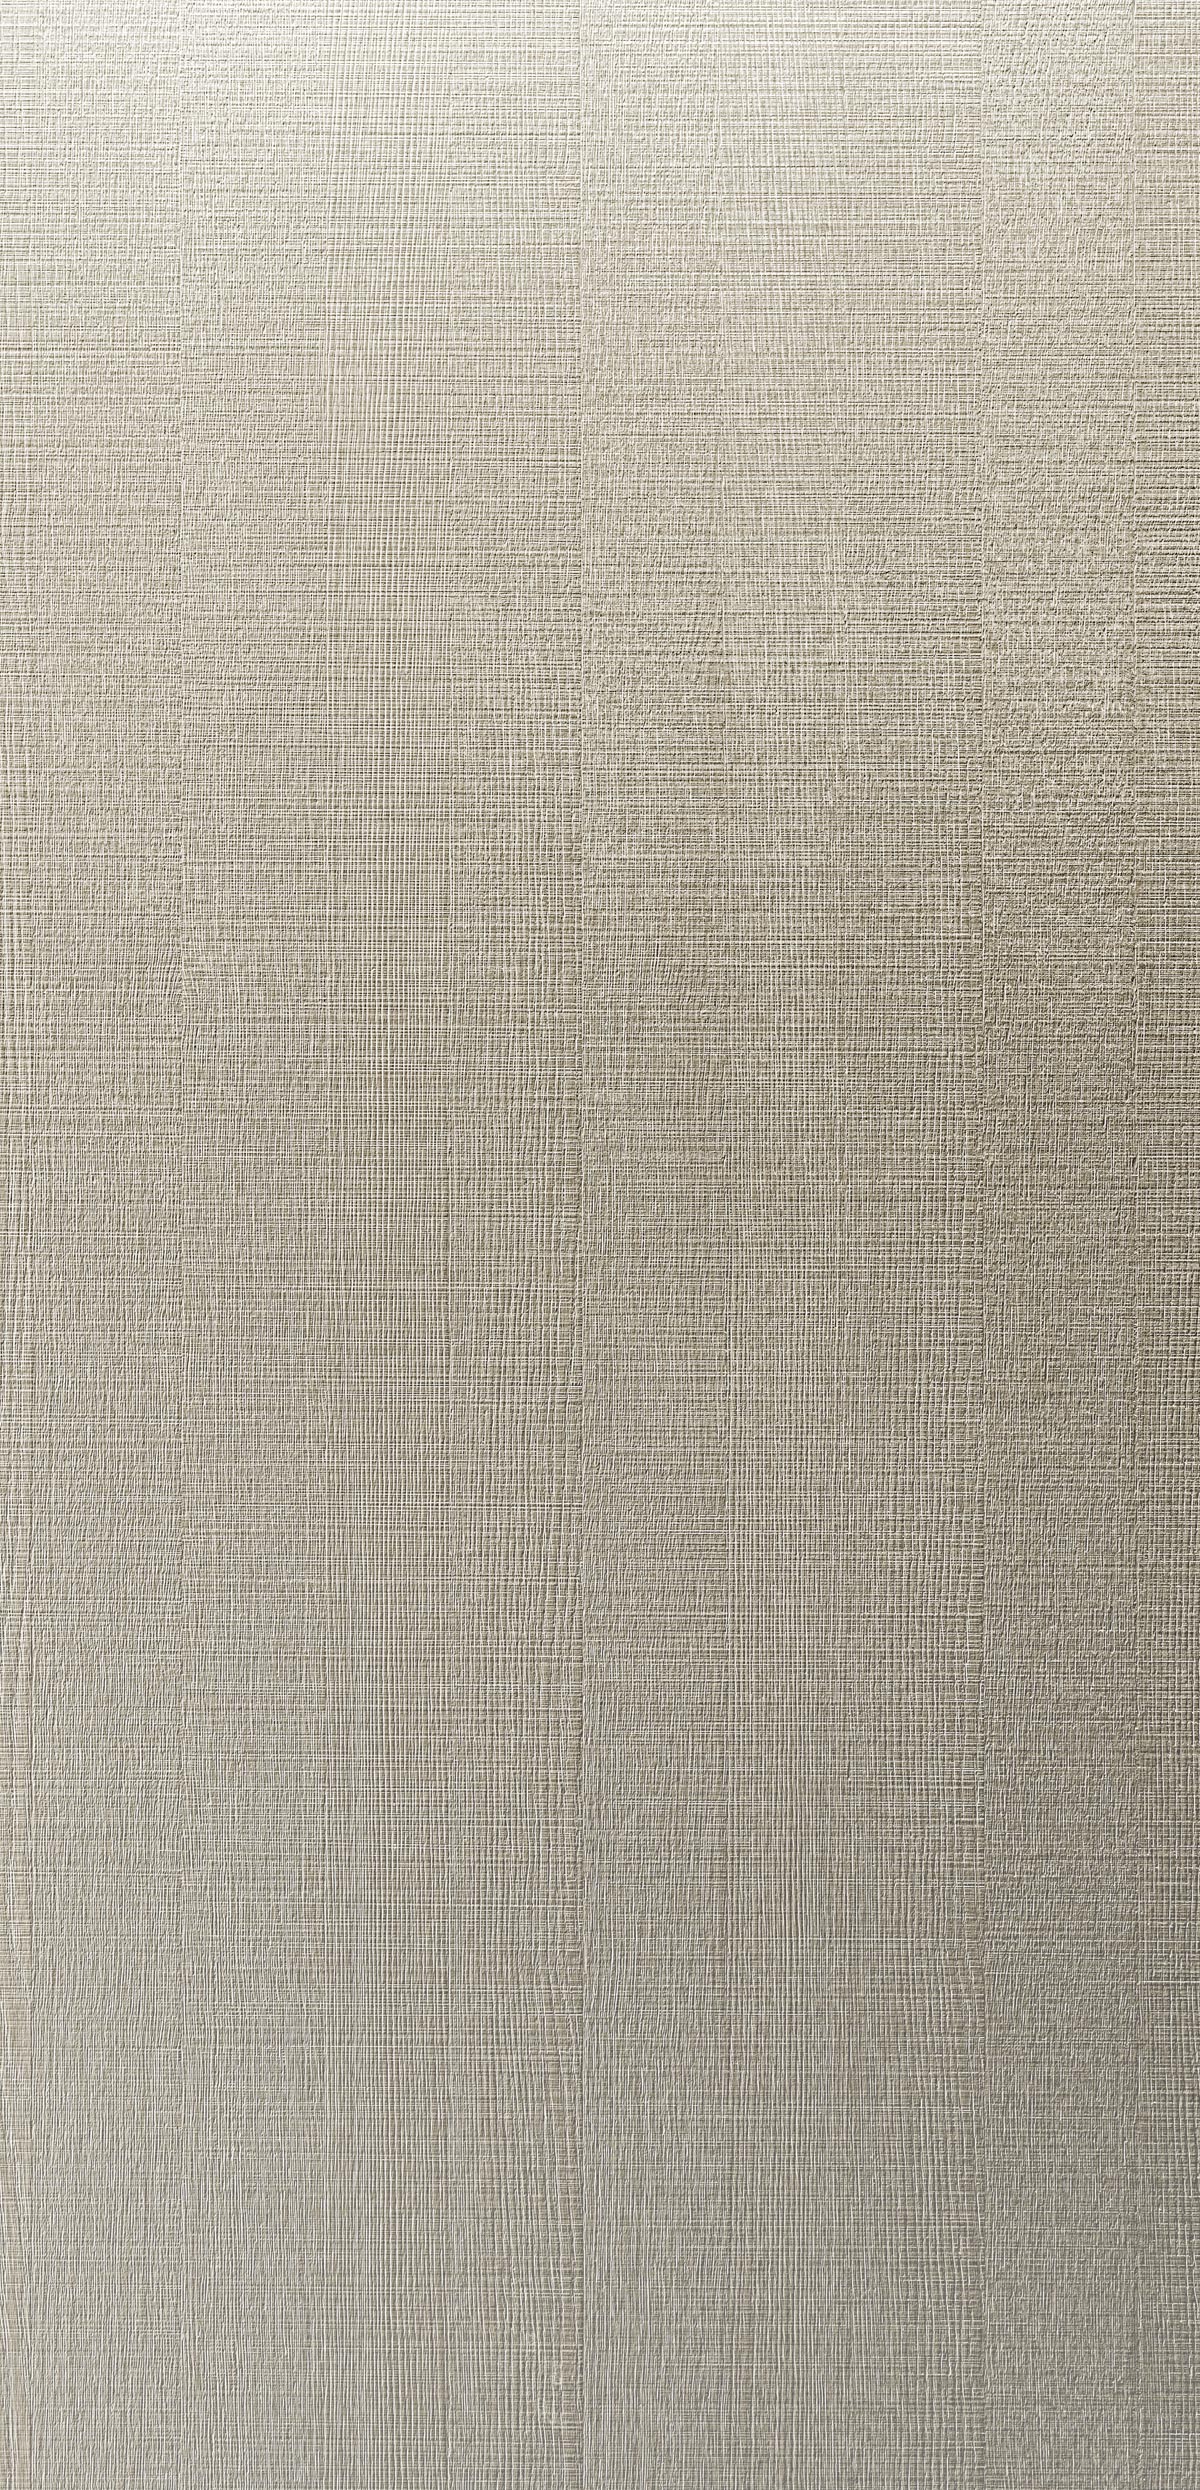 Sawn Champagne brushed 4051-panel